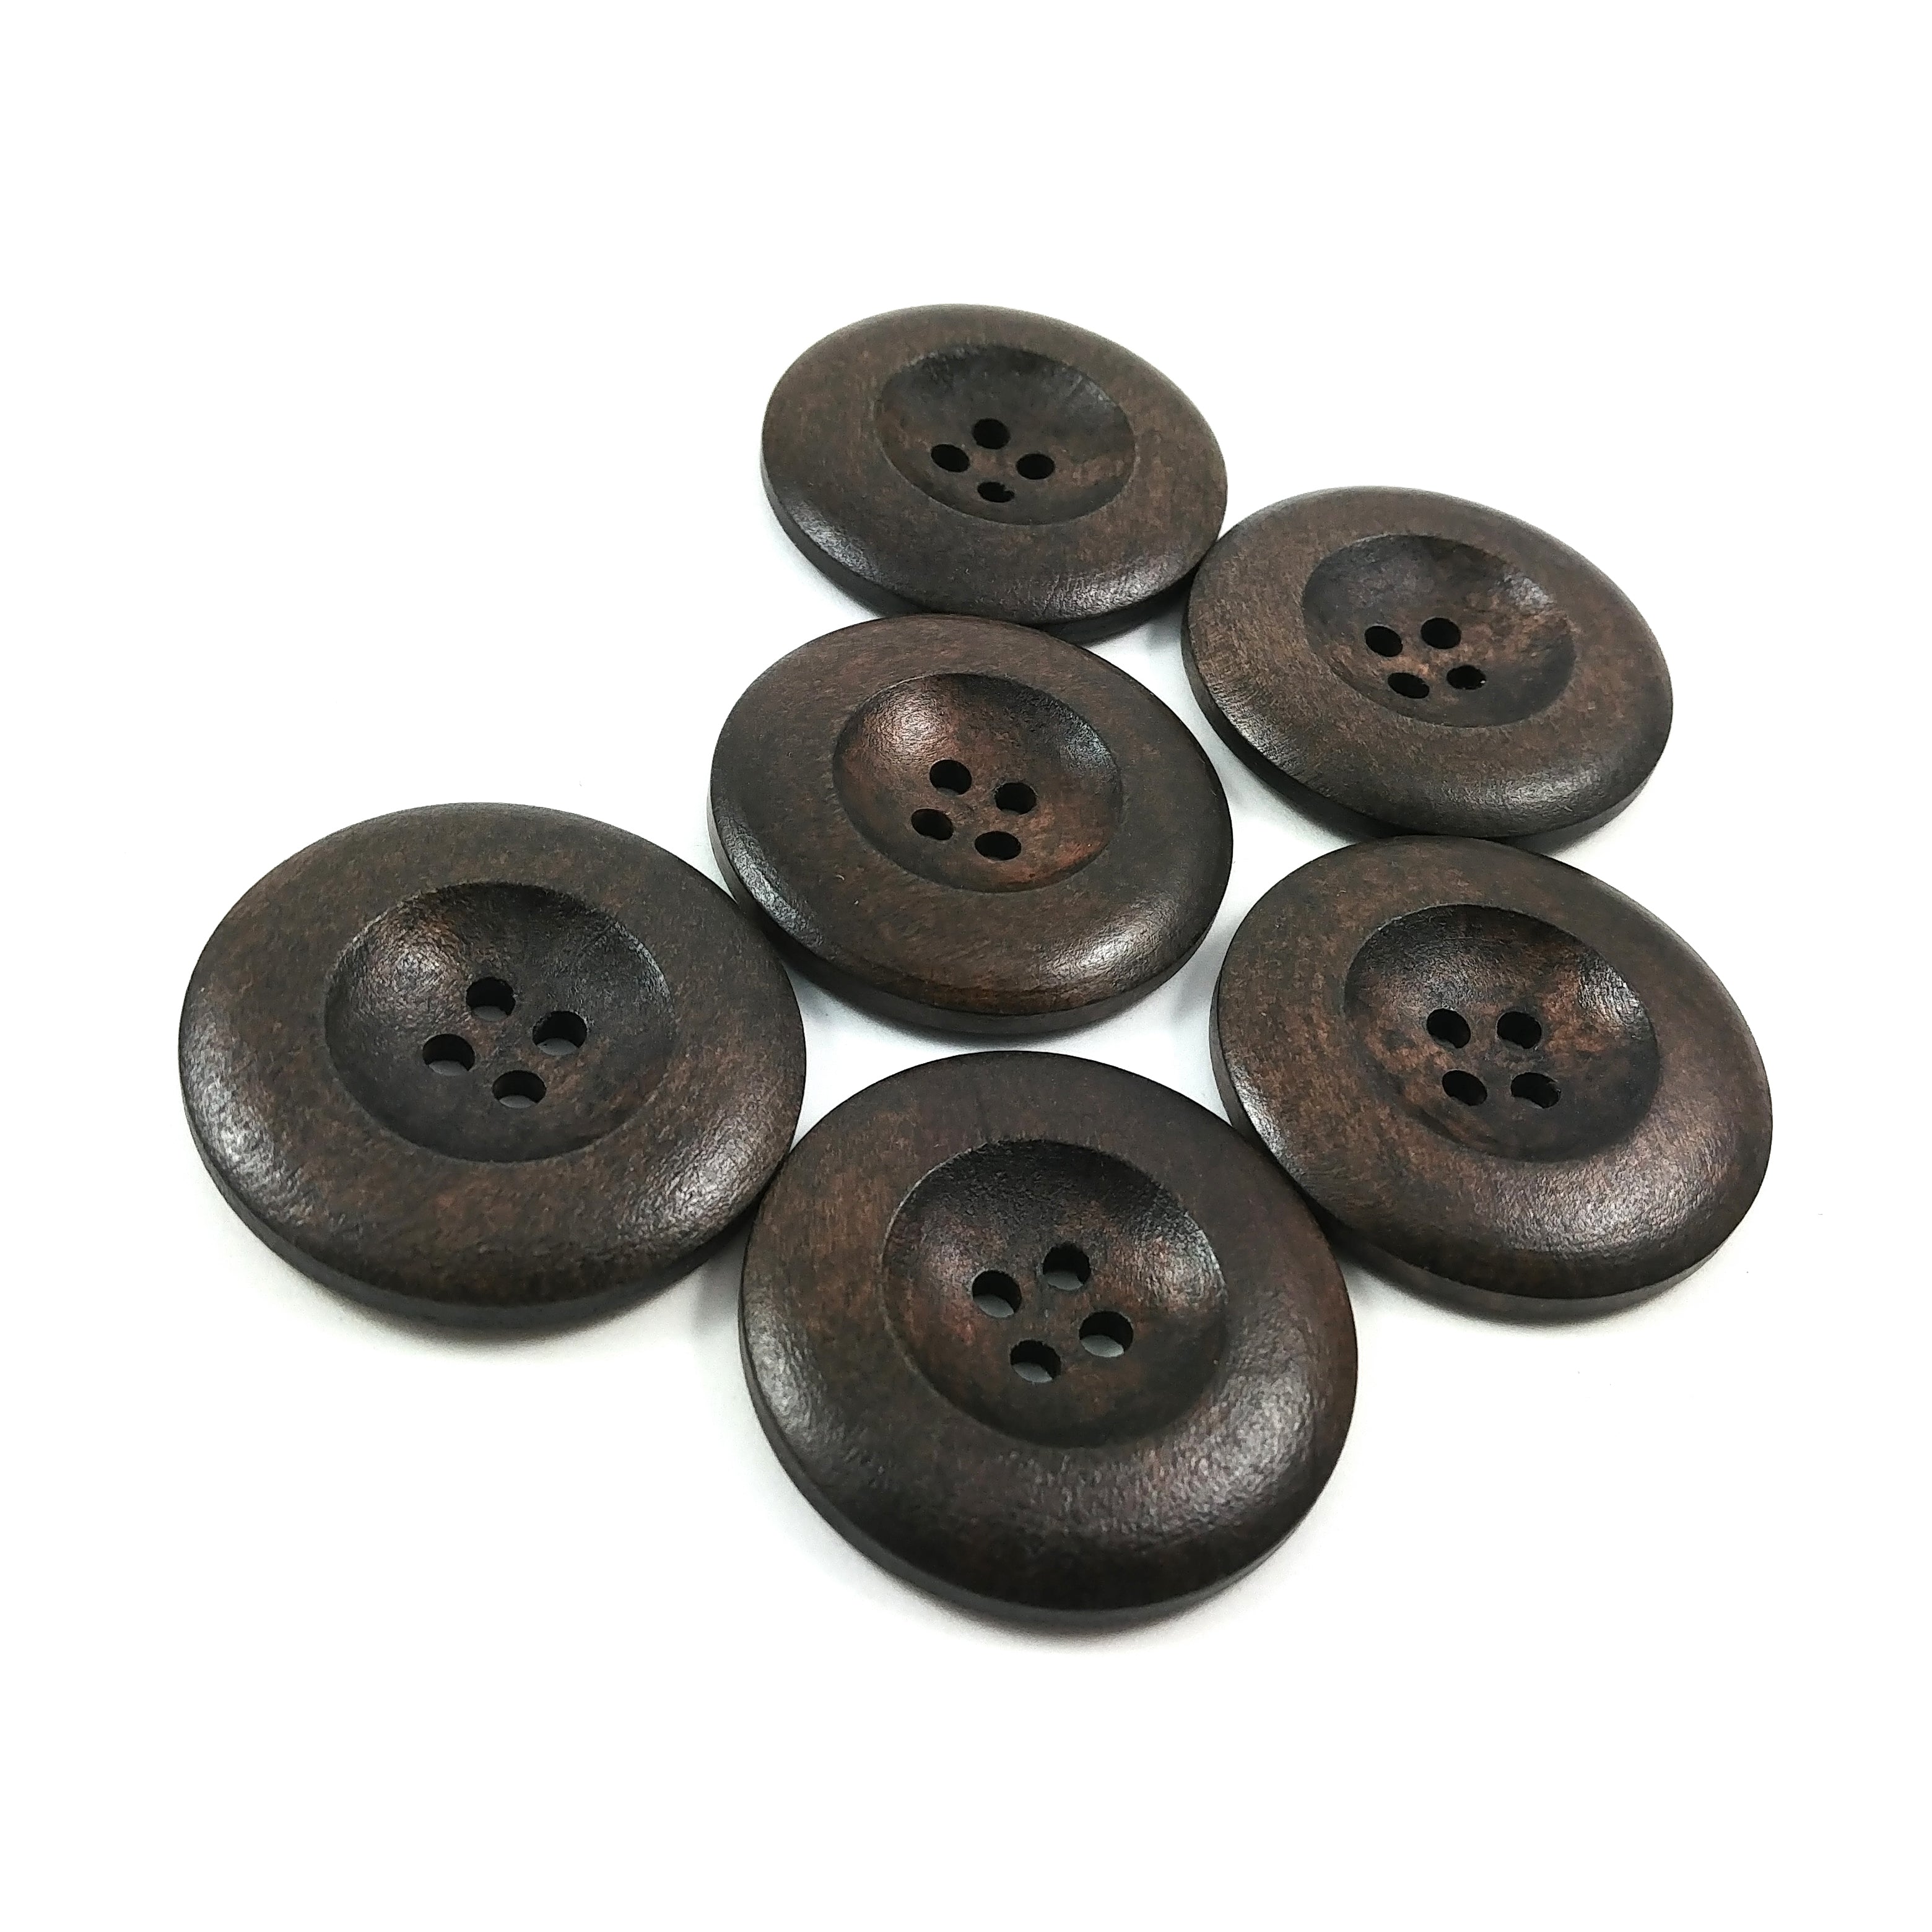 Dark Chocolate Brown Wooden Sewing Buttons 35mm - set of 6 natural wood button